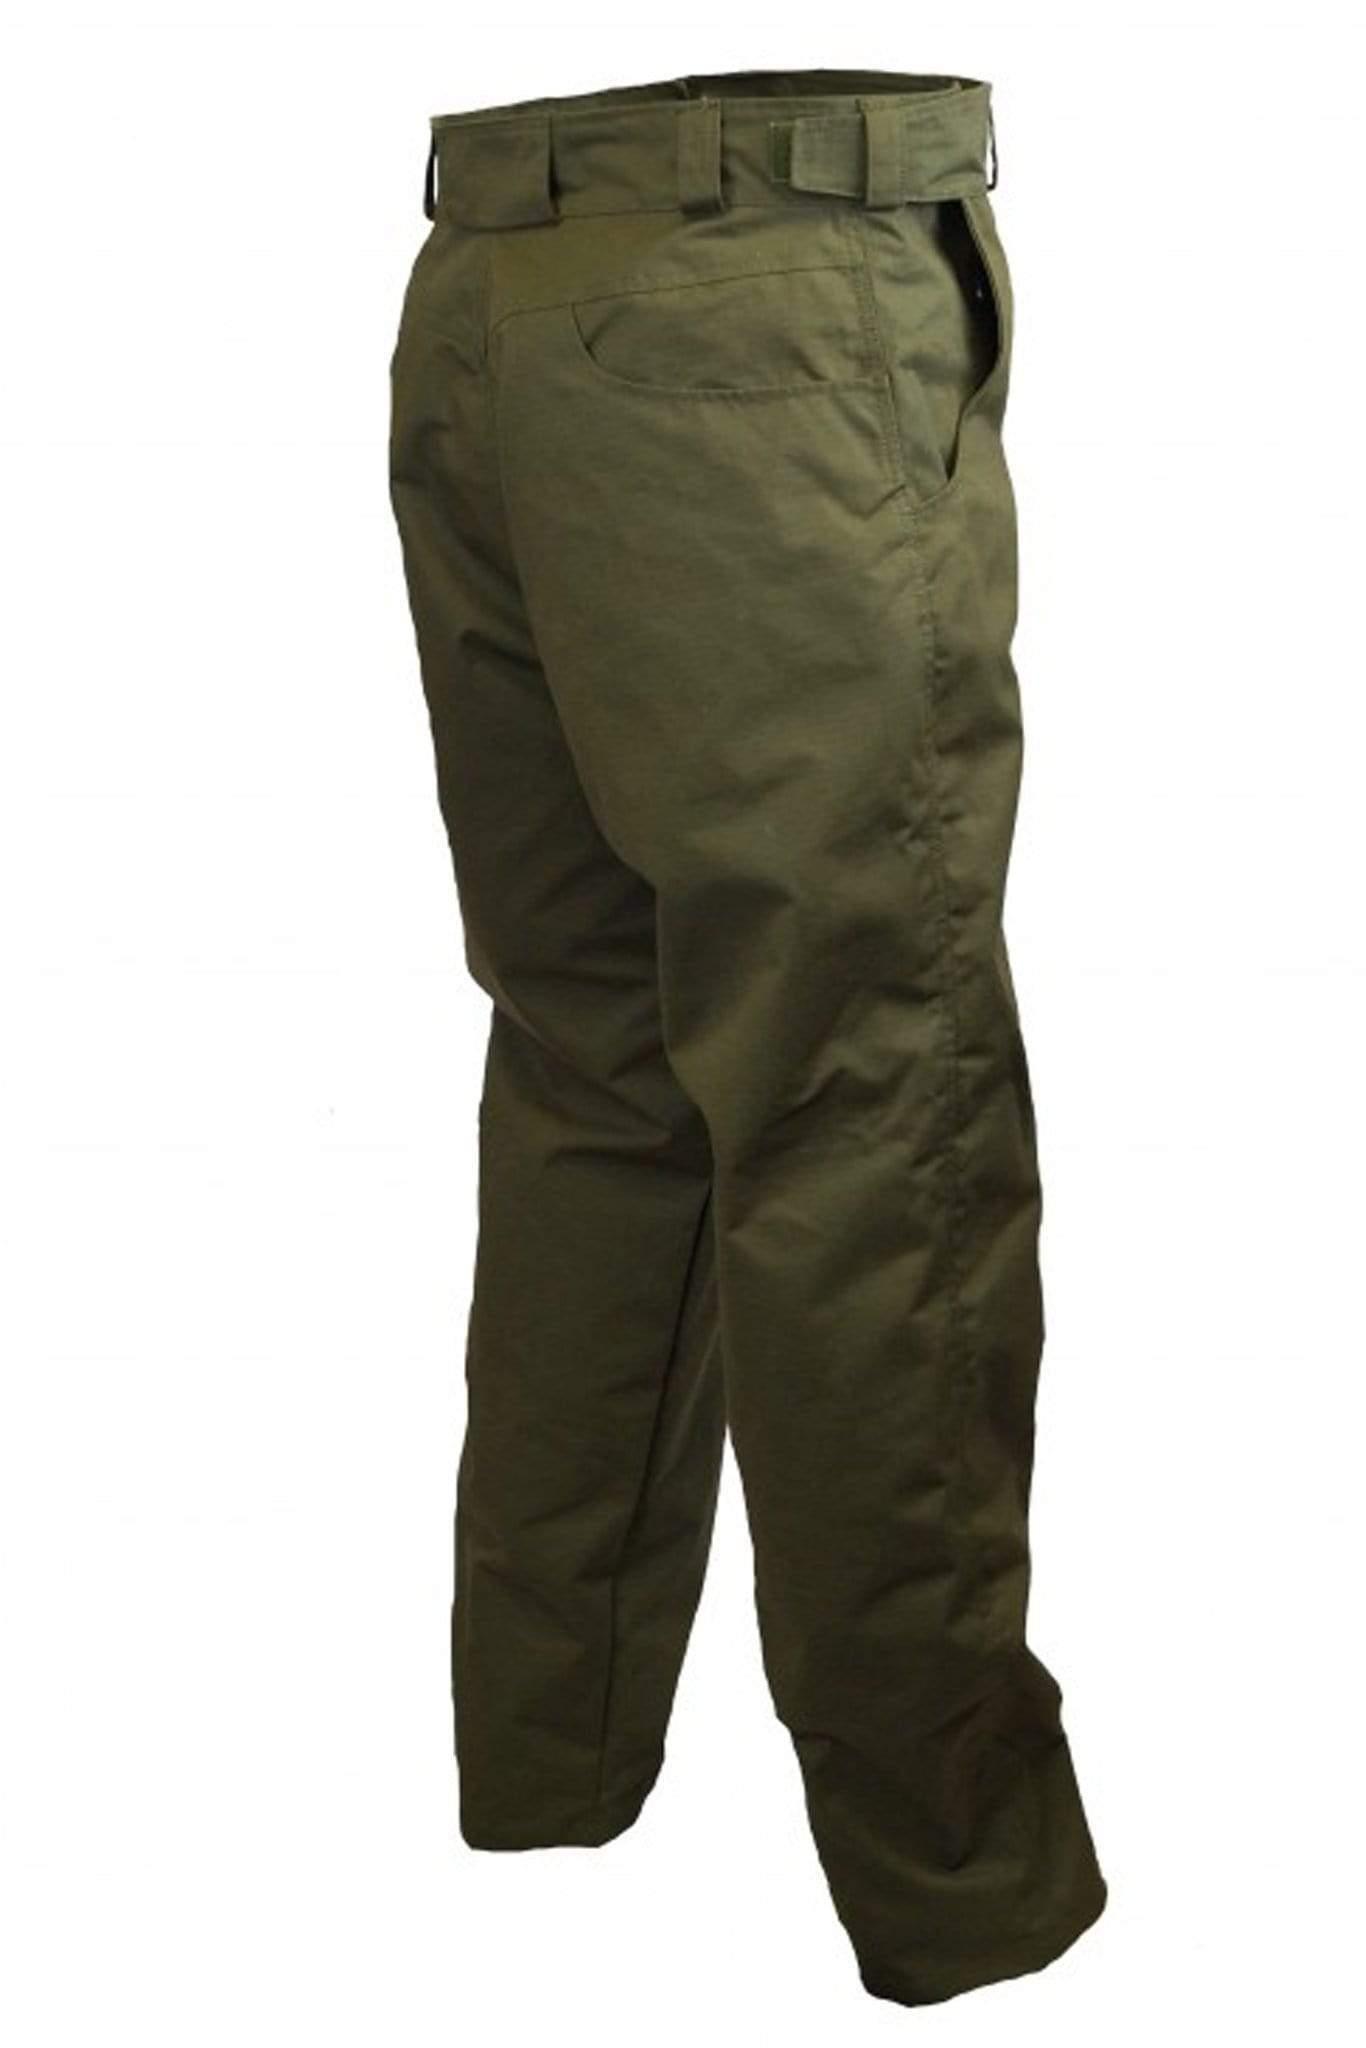 Fortis Trousers Fortis Ladies Waterproof Legacy Phase I Trousers - button waist